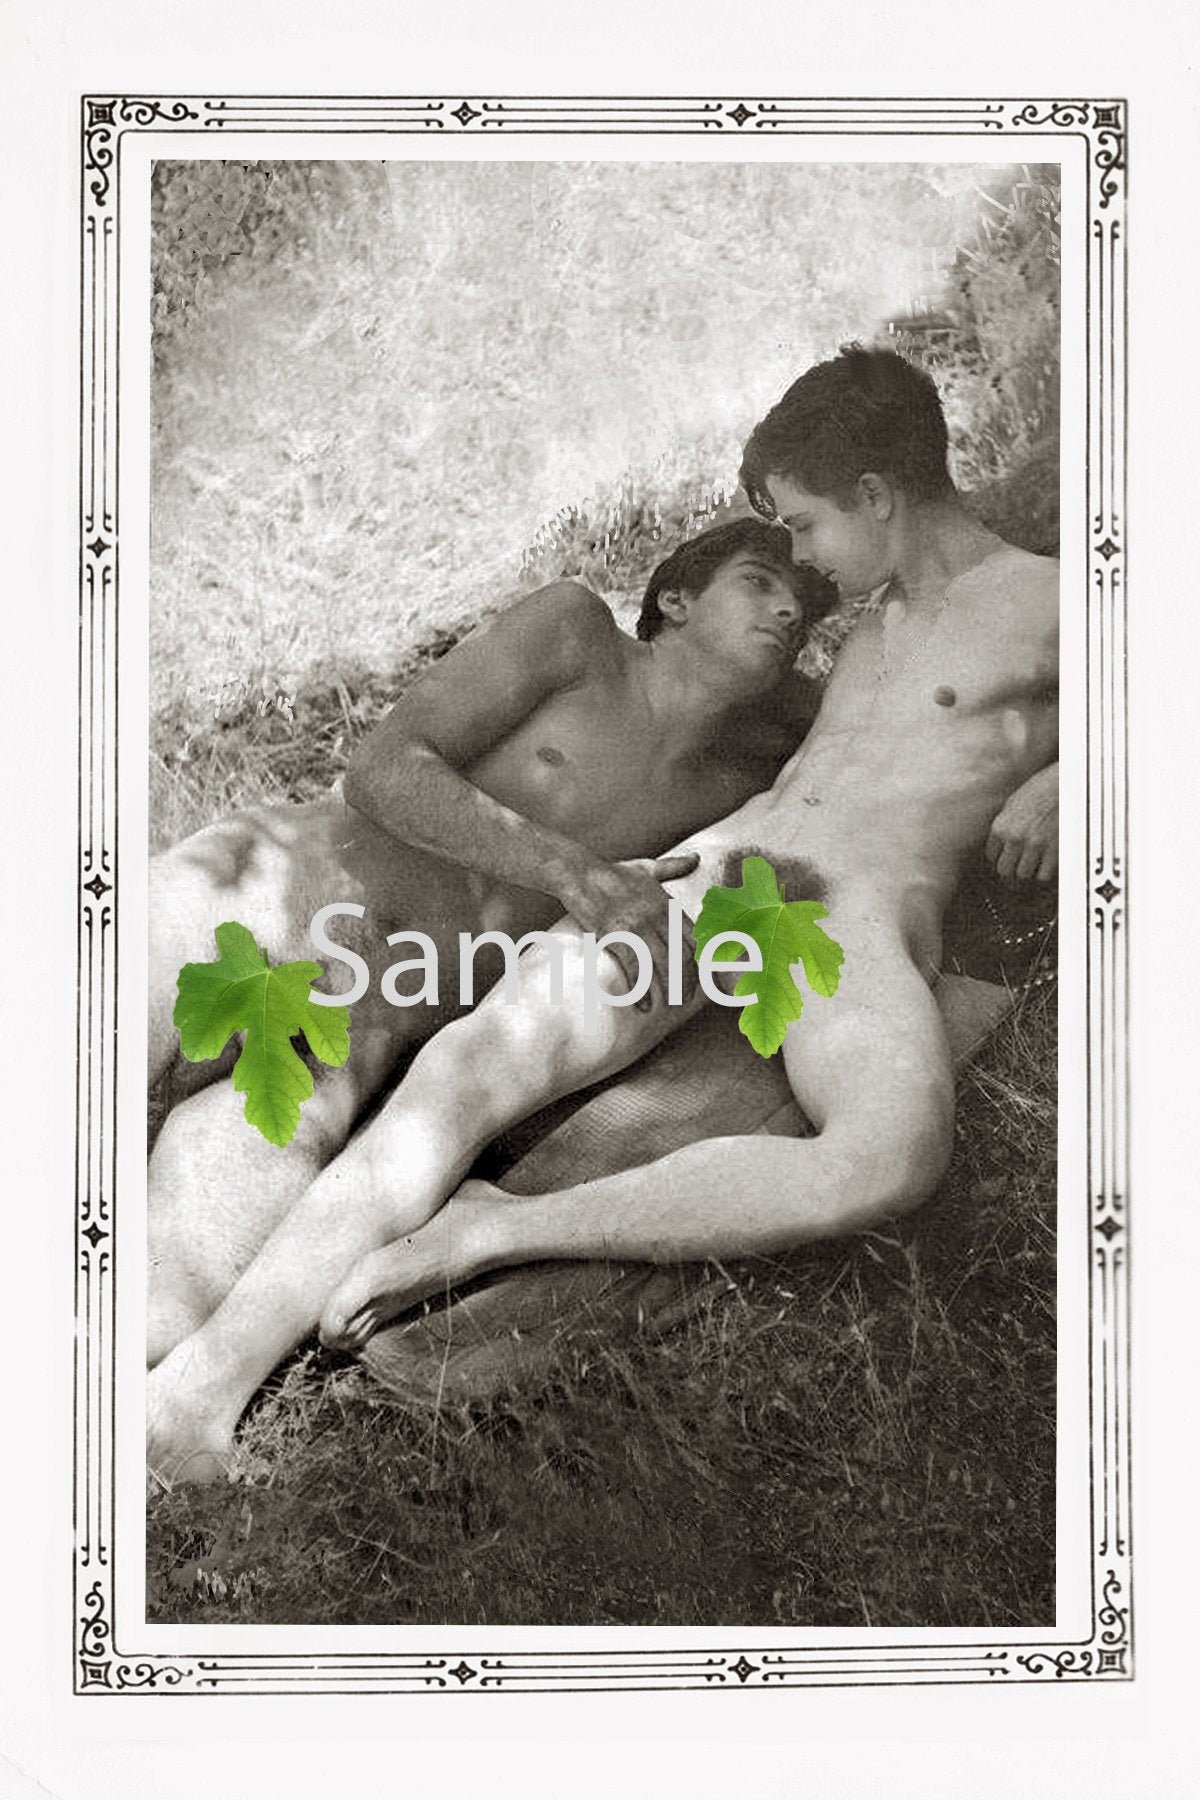 1920s Vintage Nude Girls Porn - Vintage 1920s Photo Reprint of Two Nude Gay Men Sharing an - Etsy